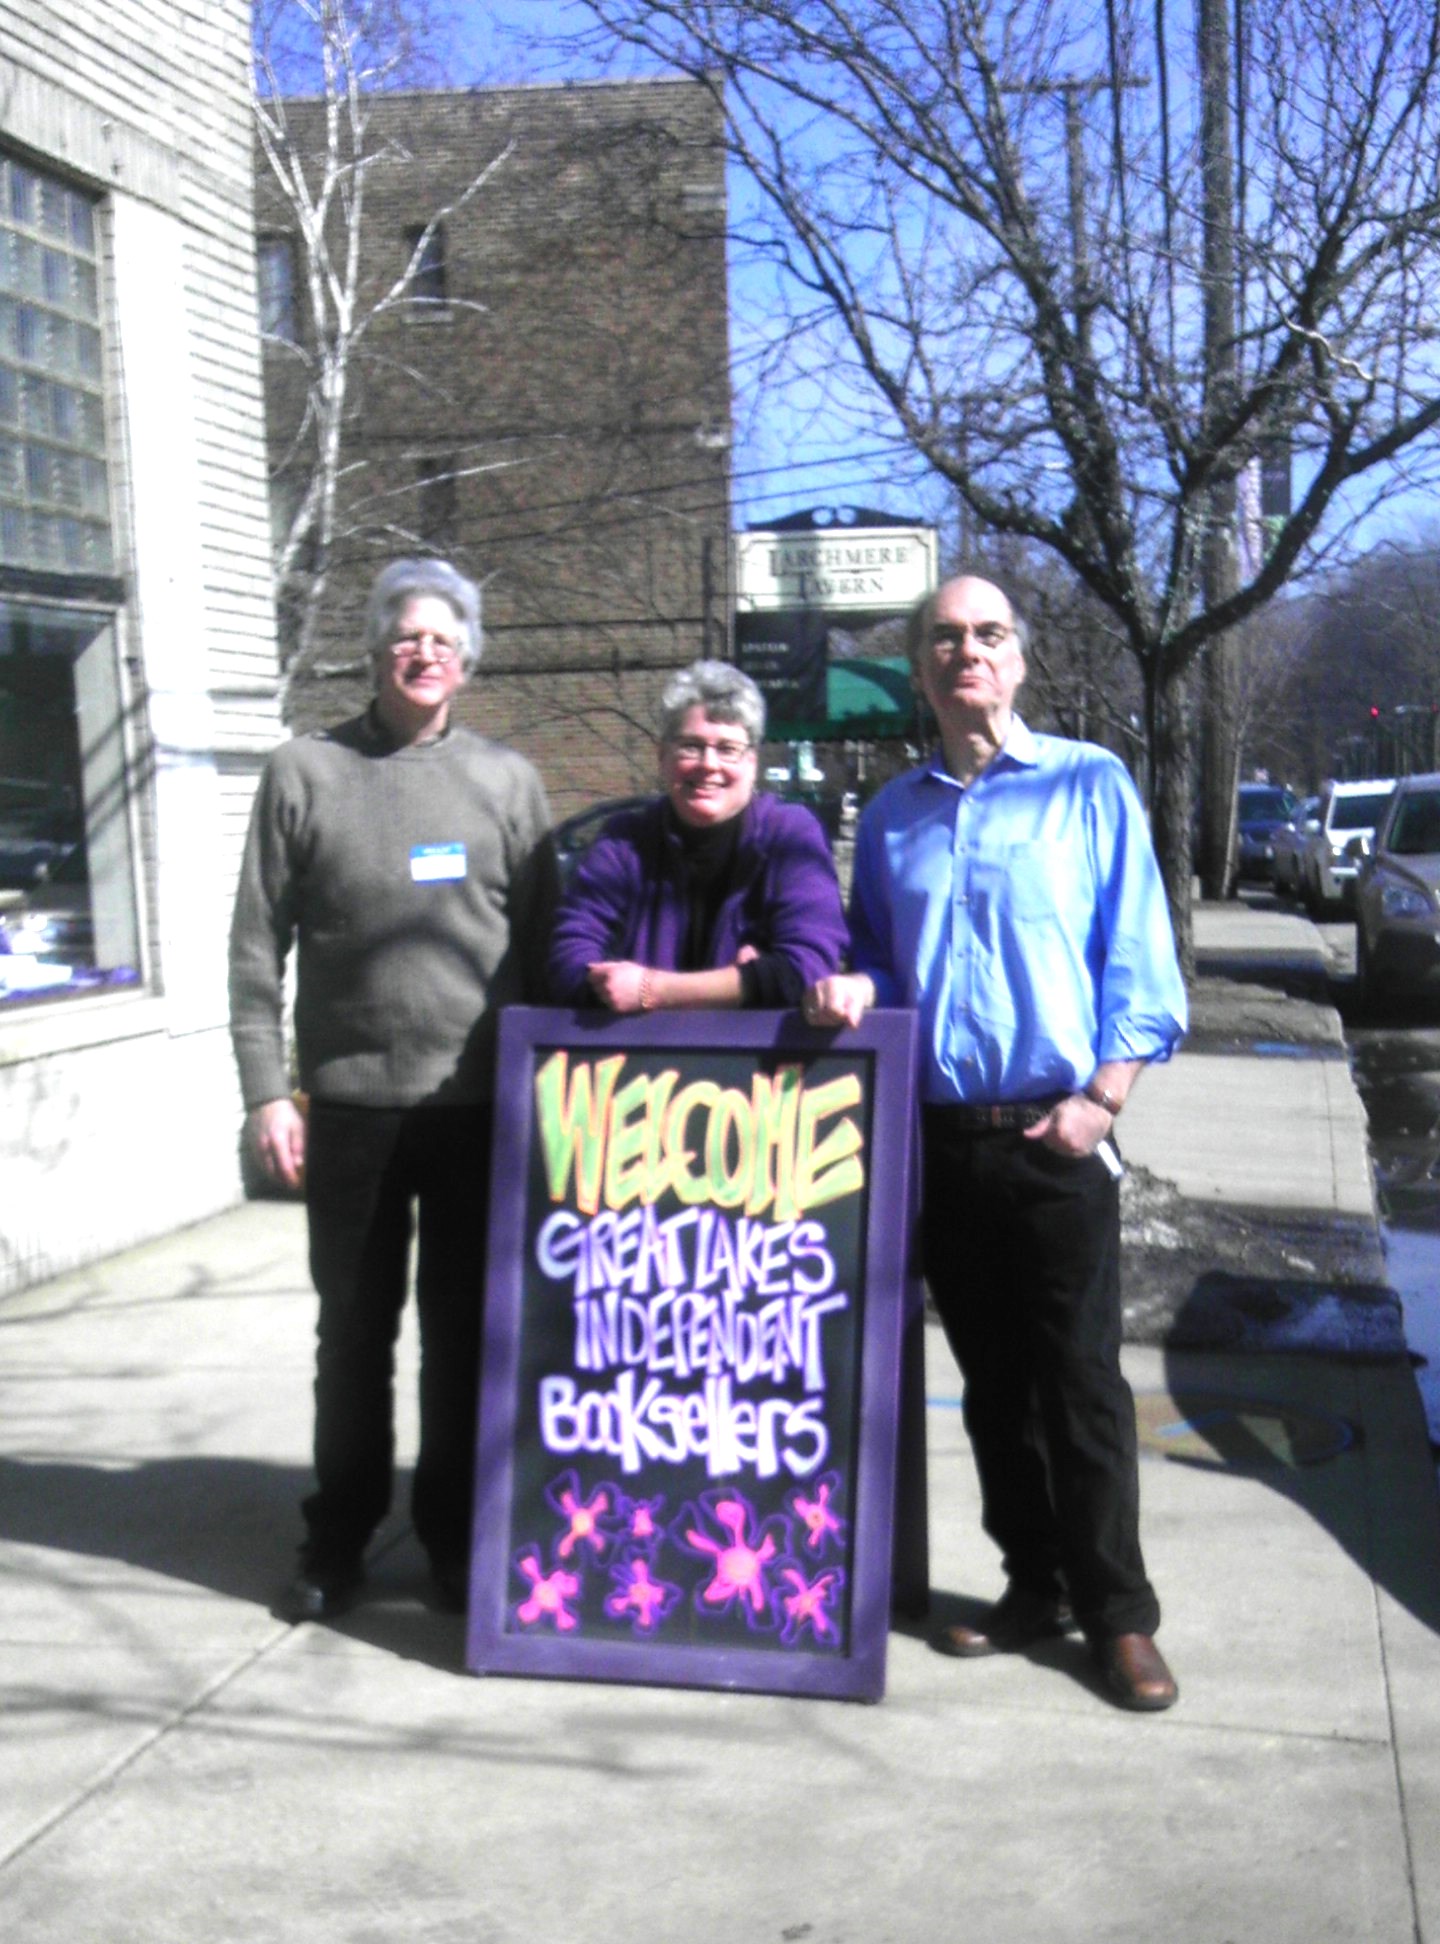 ABA Board member Jonathon Welch, Harriet Logan, and Oren Teicher at Loganberry Books during the Cleveland Spring Forum.